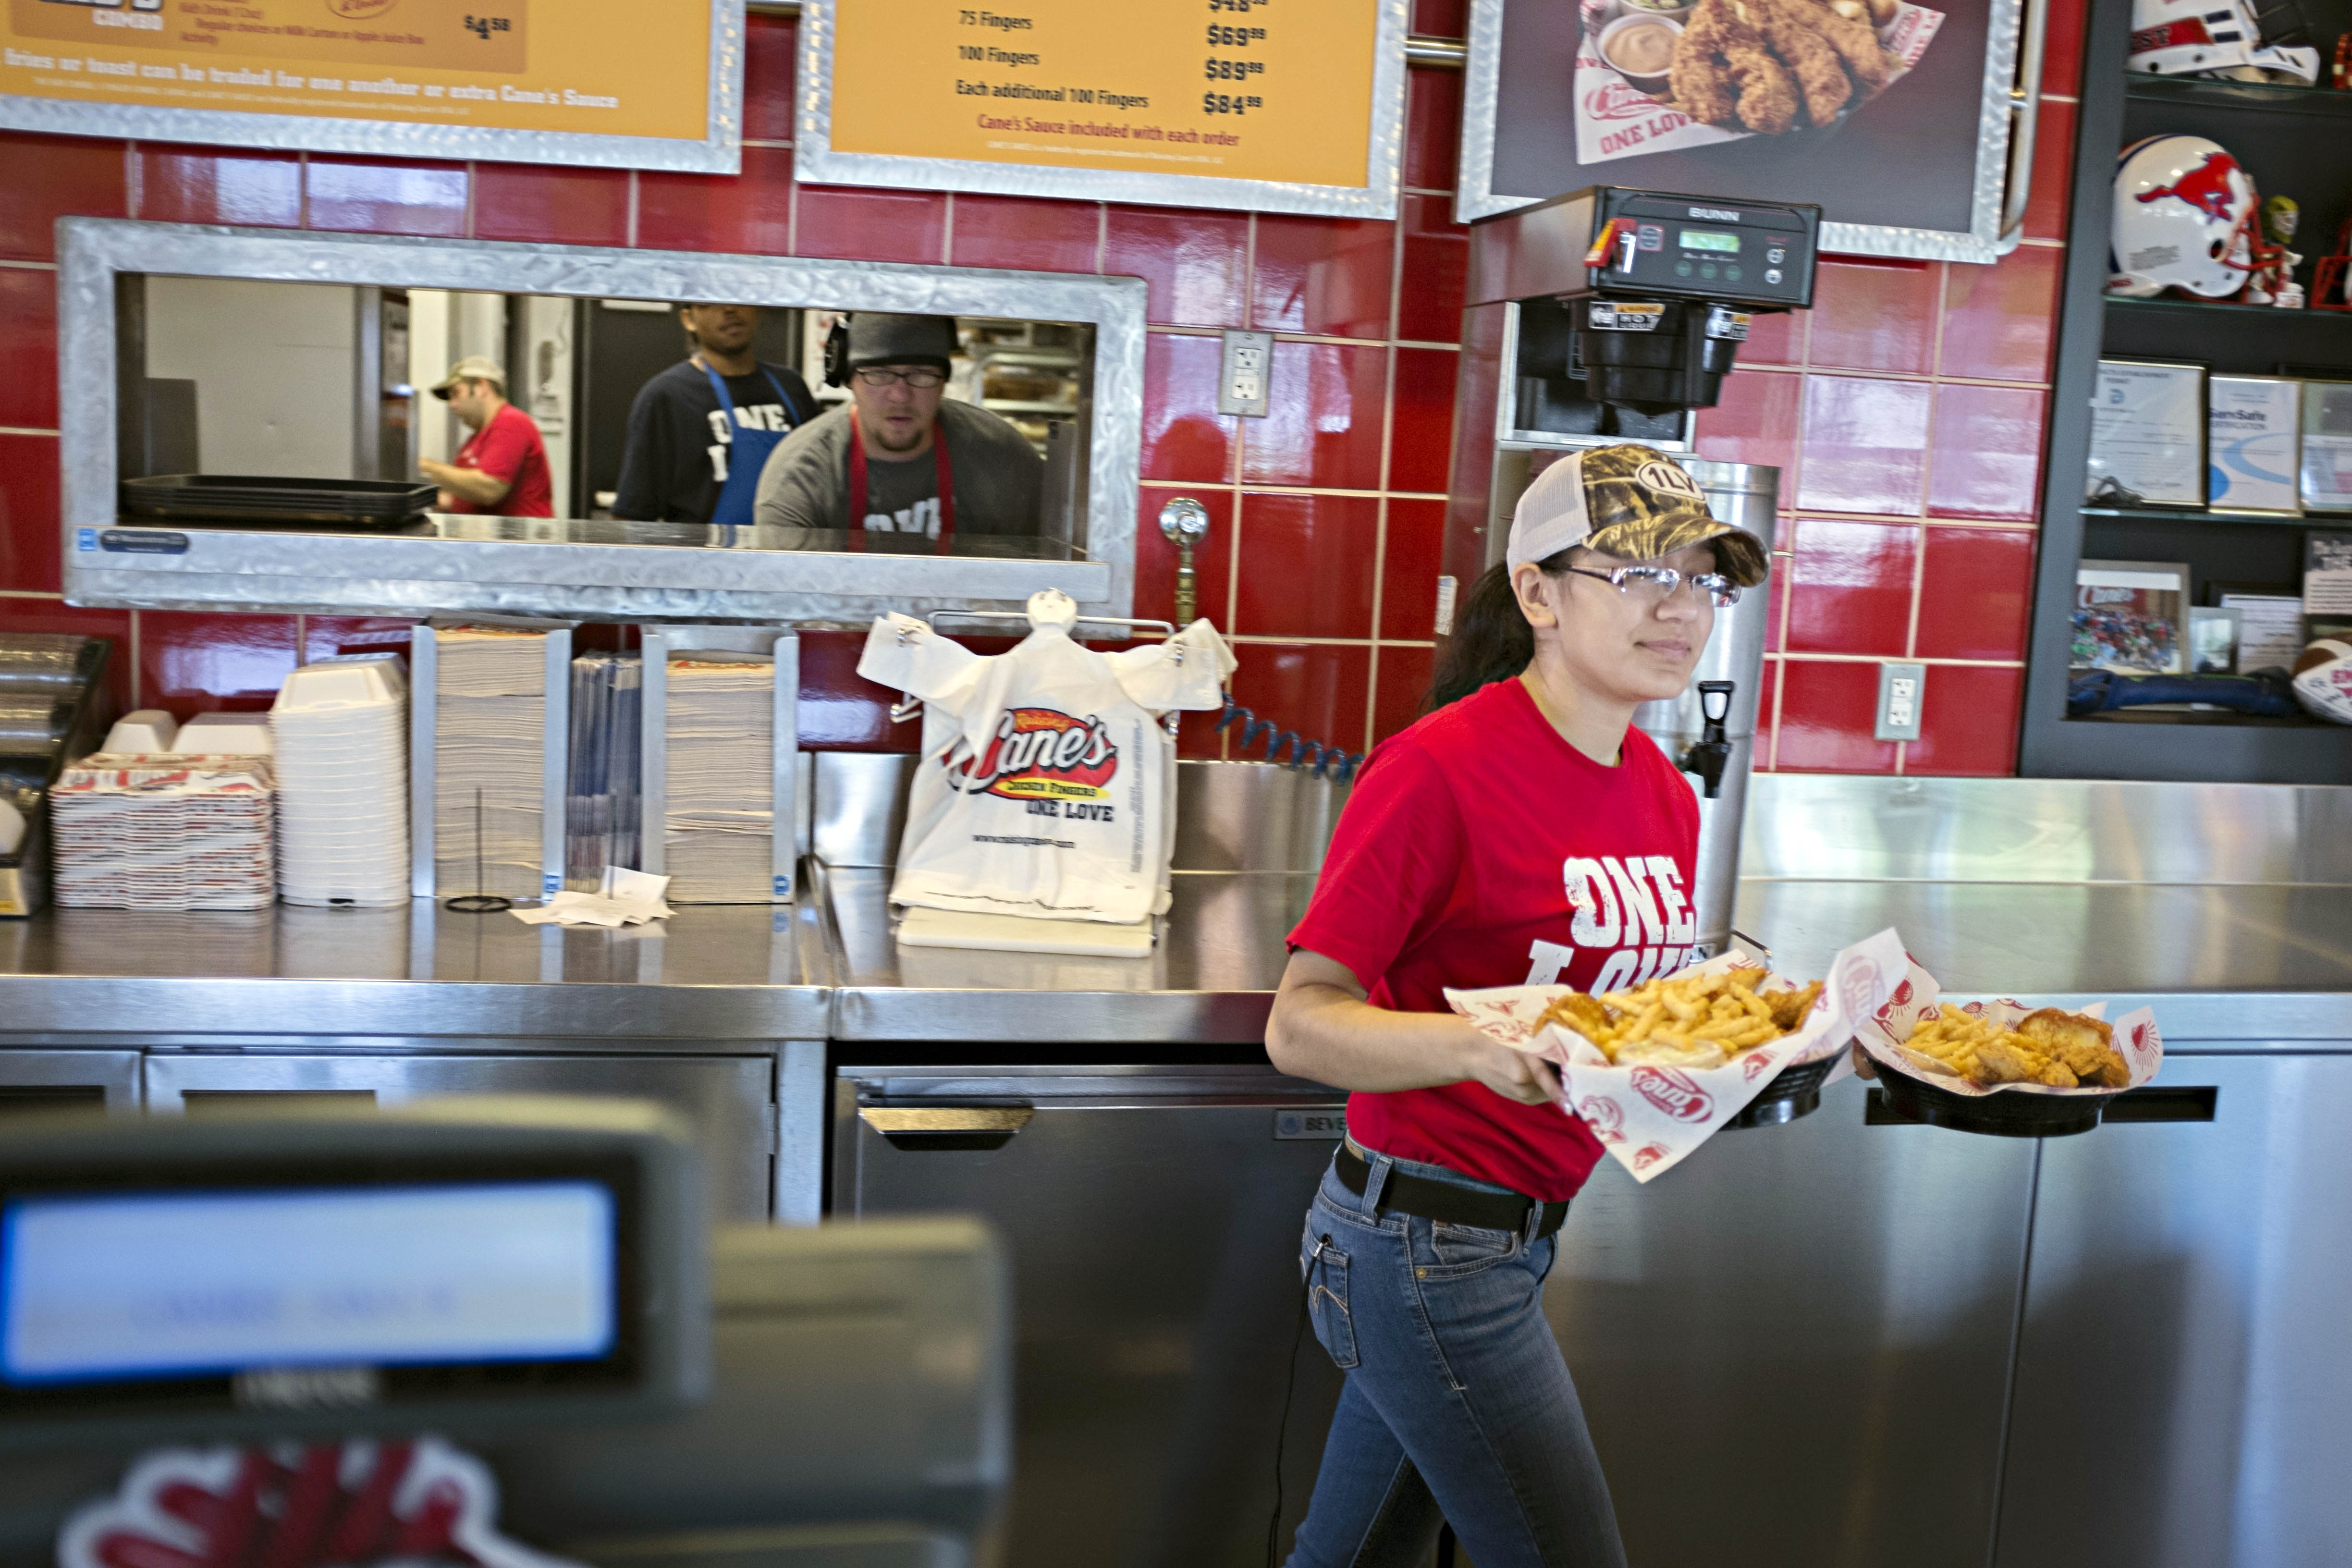 Raising Cane's Named a DFW Top Workplace by Dallas Morning News for 15  Years in a Row